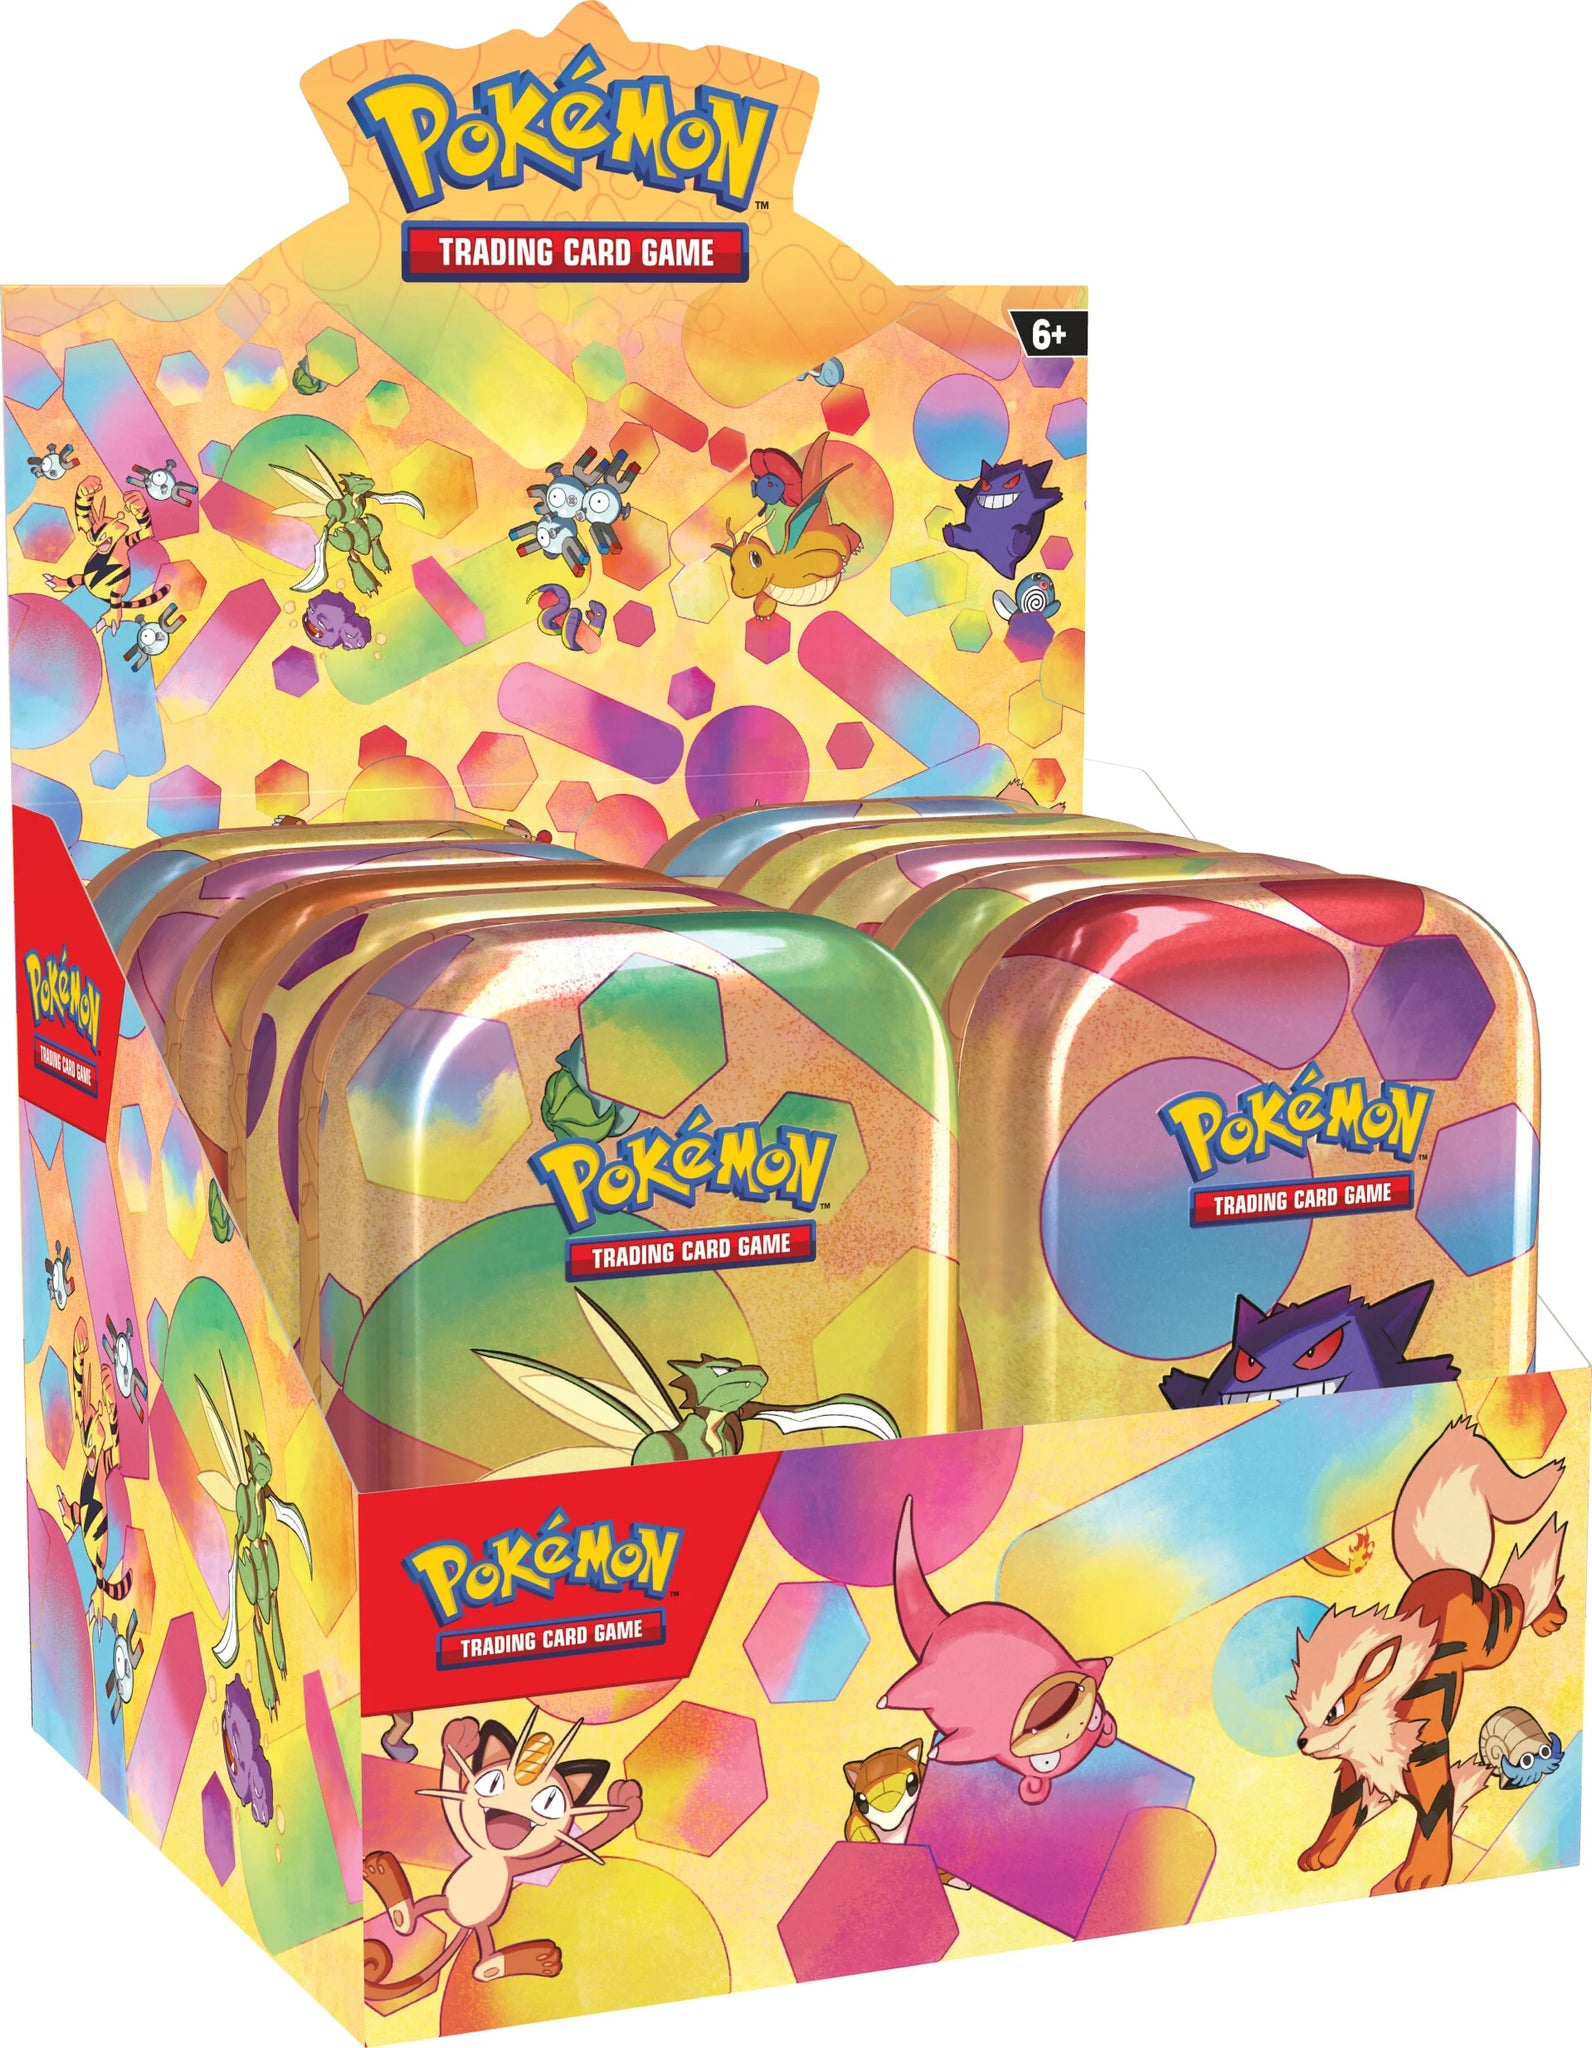 STOP Watch this before you buy Pokemon 151 set!!! 